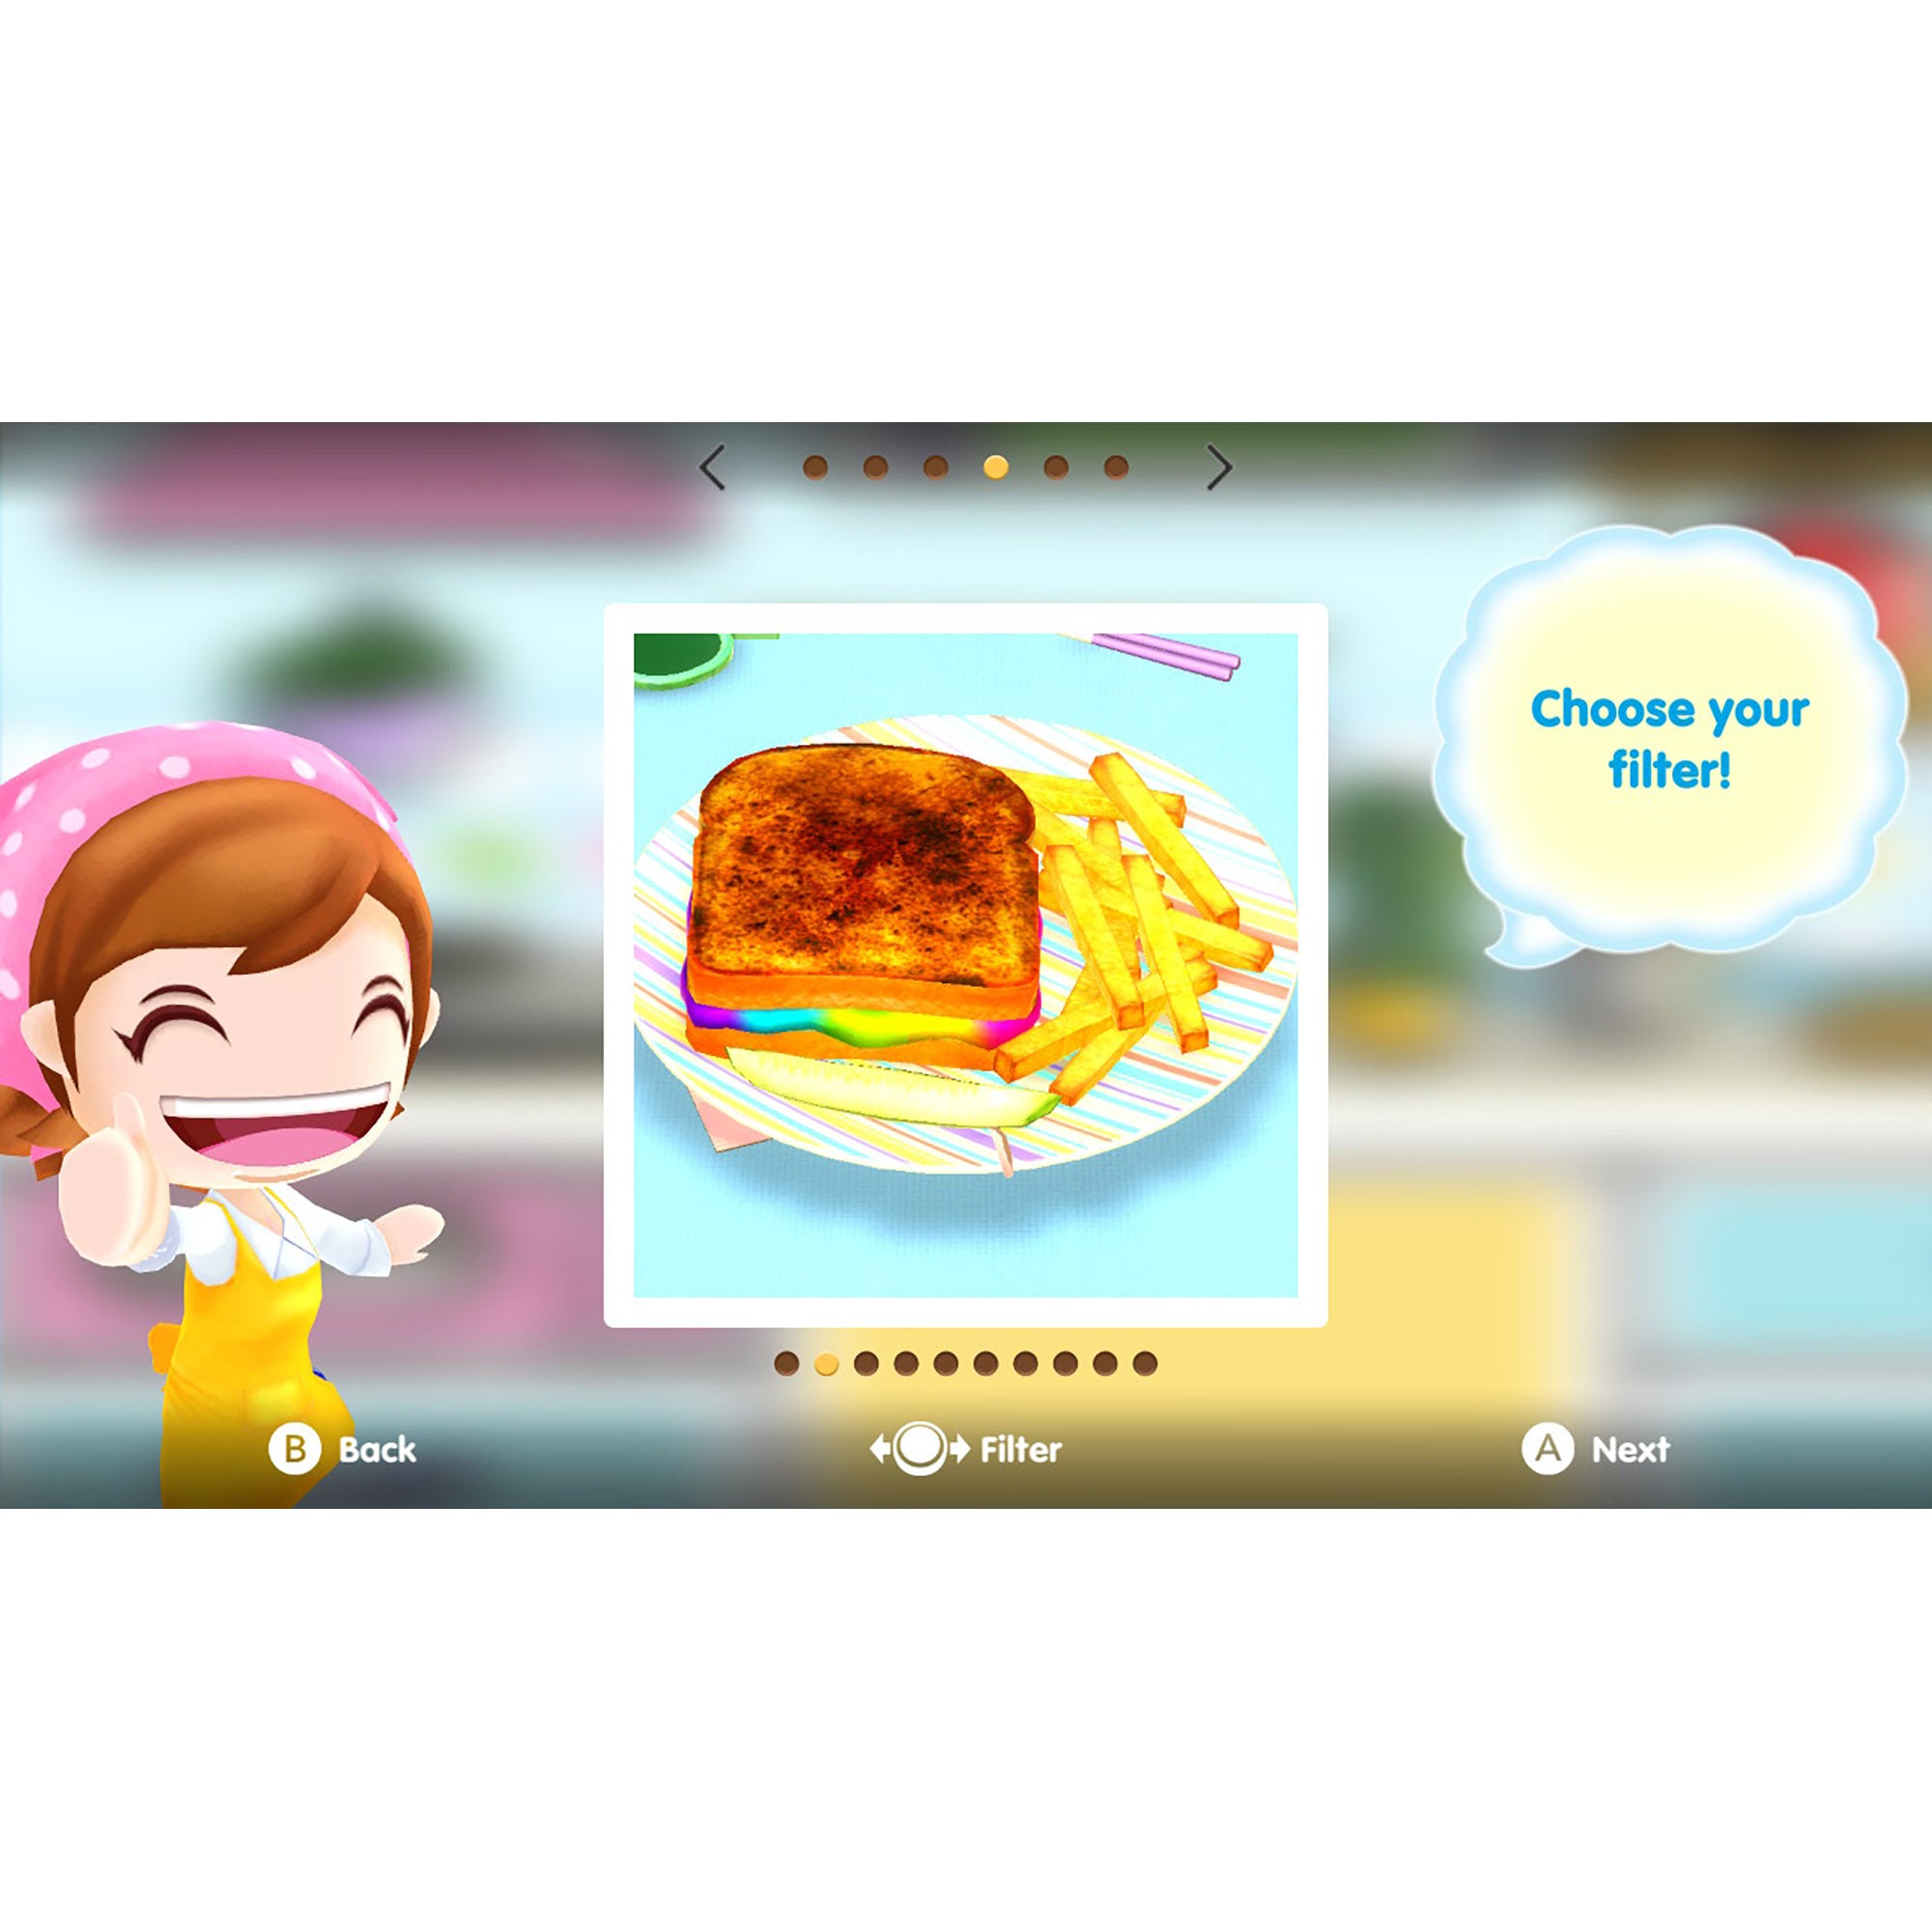 cooking mama switch digital download